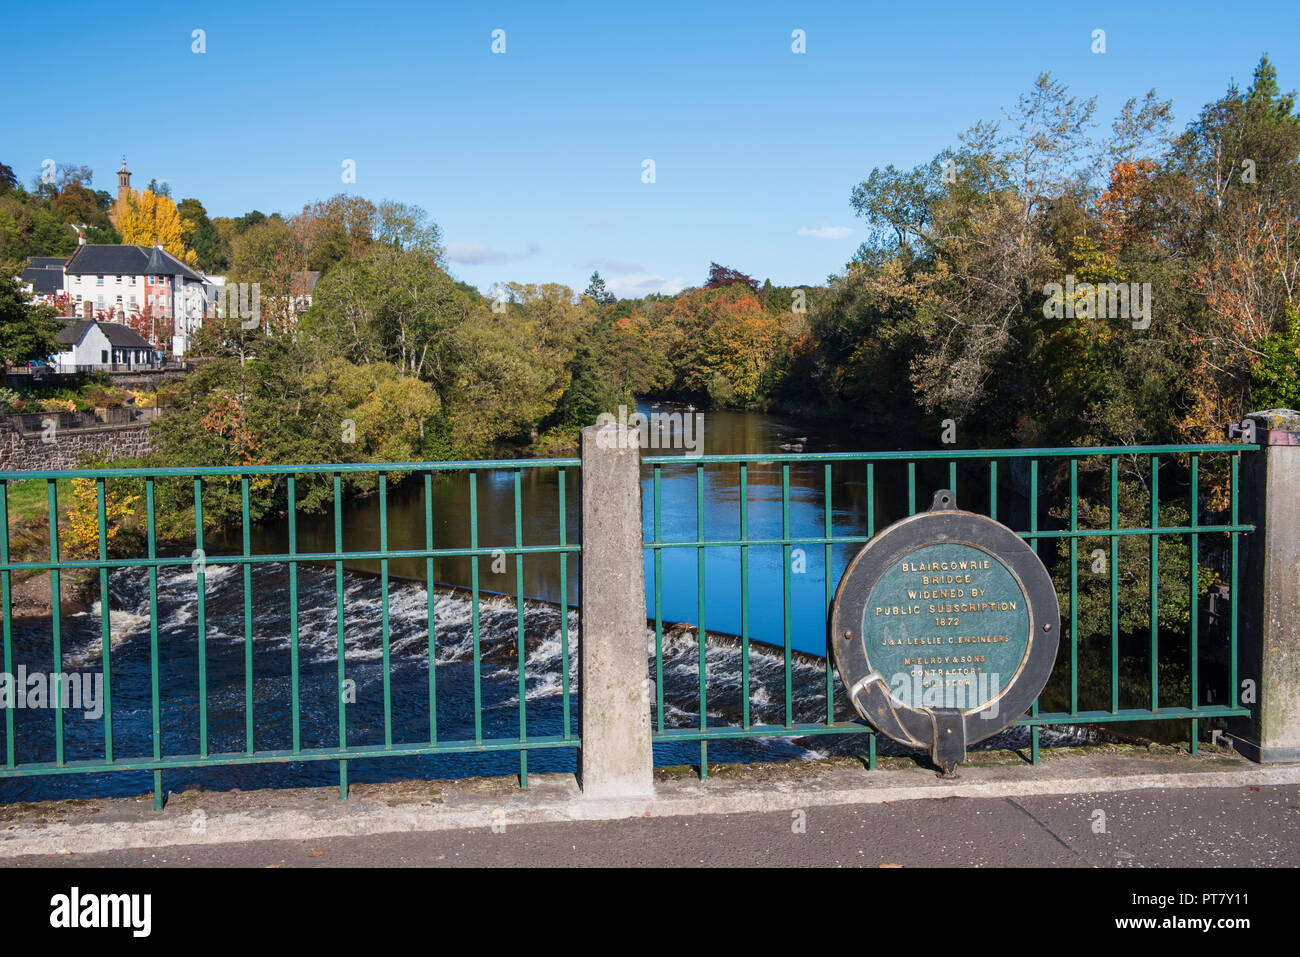 View of the River Ericht from Blairgowrie Bridge, Blairgowrie, Perthshire, Scotland. Stock Photo